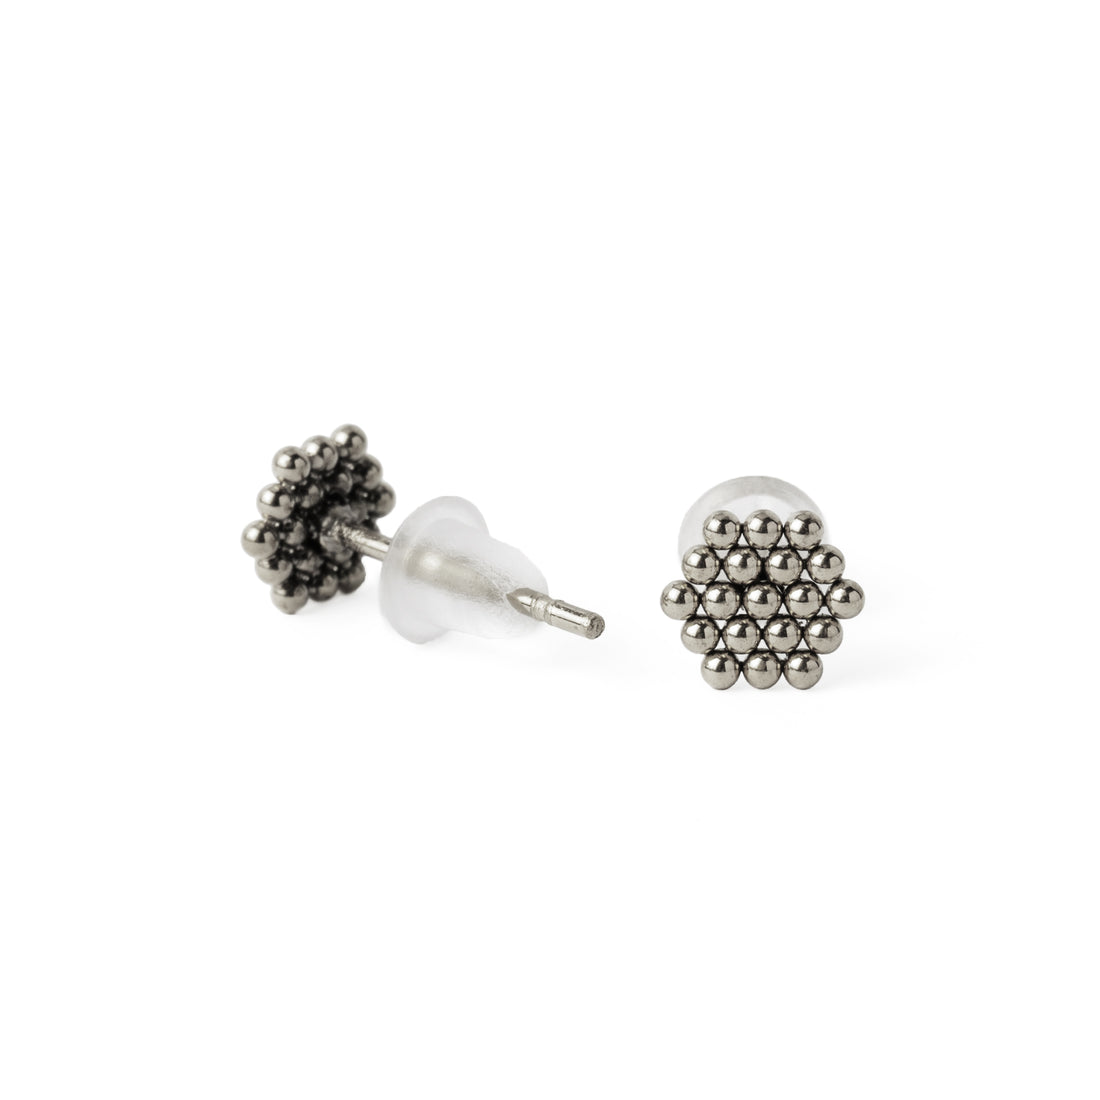 Dotted Hexagon Ear Studs front and back view